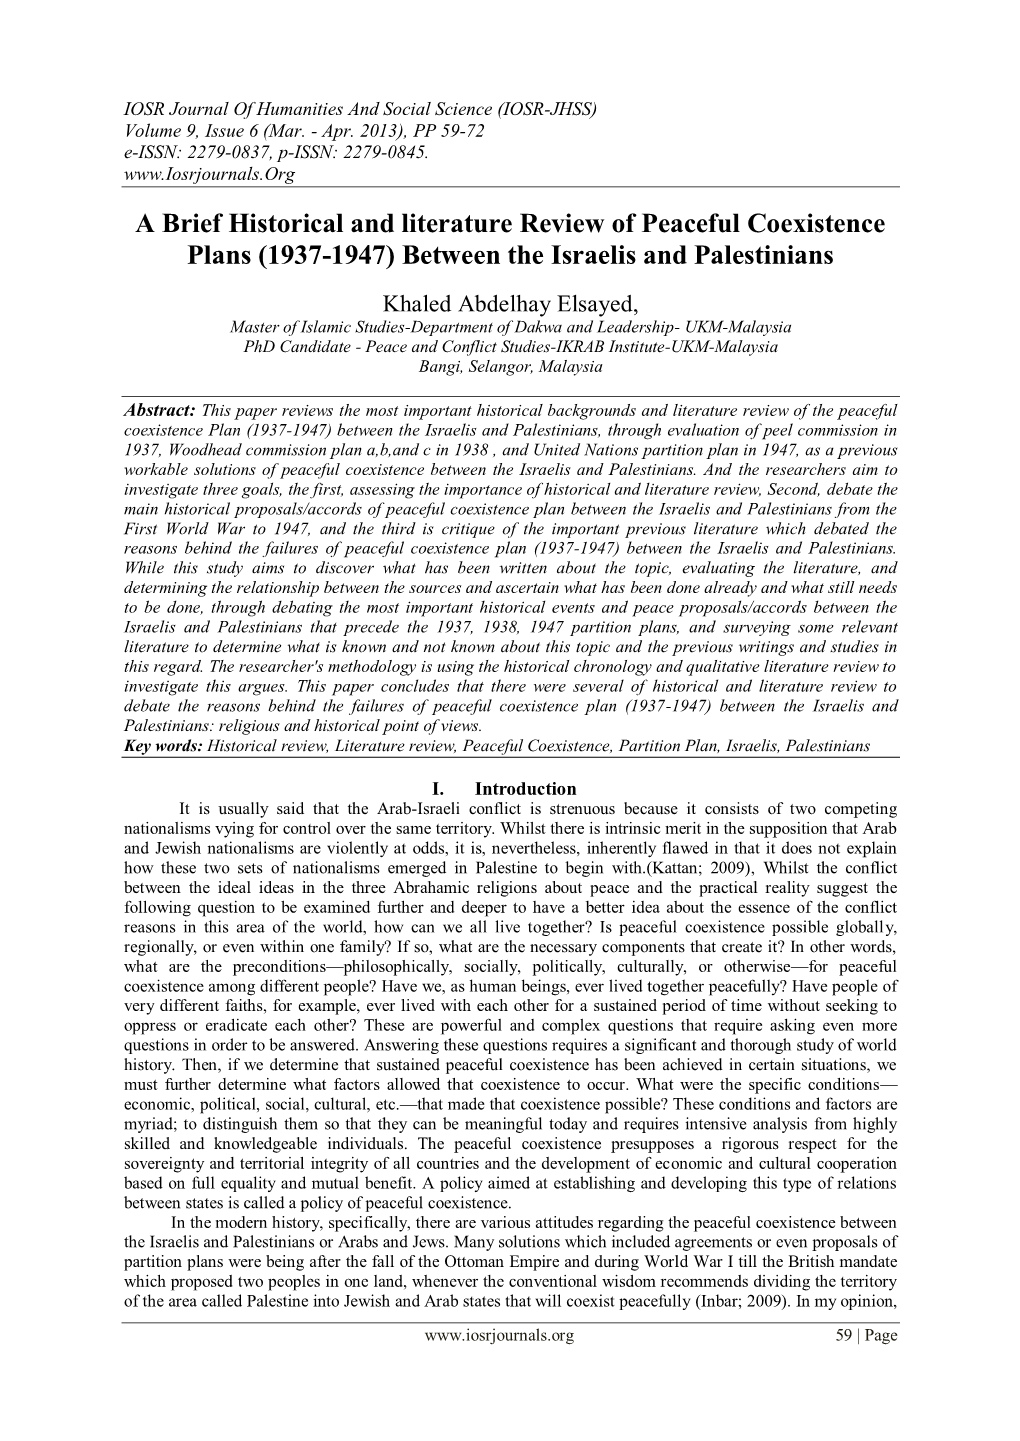 A Brief Historical and Literature Review of Peaceful Coexistence Plans (1937-1947) Between the Israelis and Palestinians